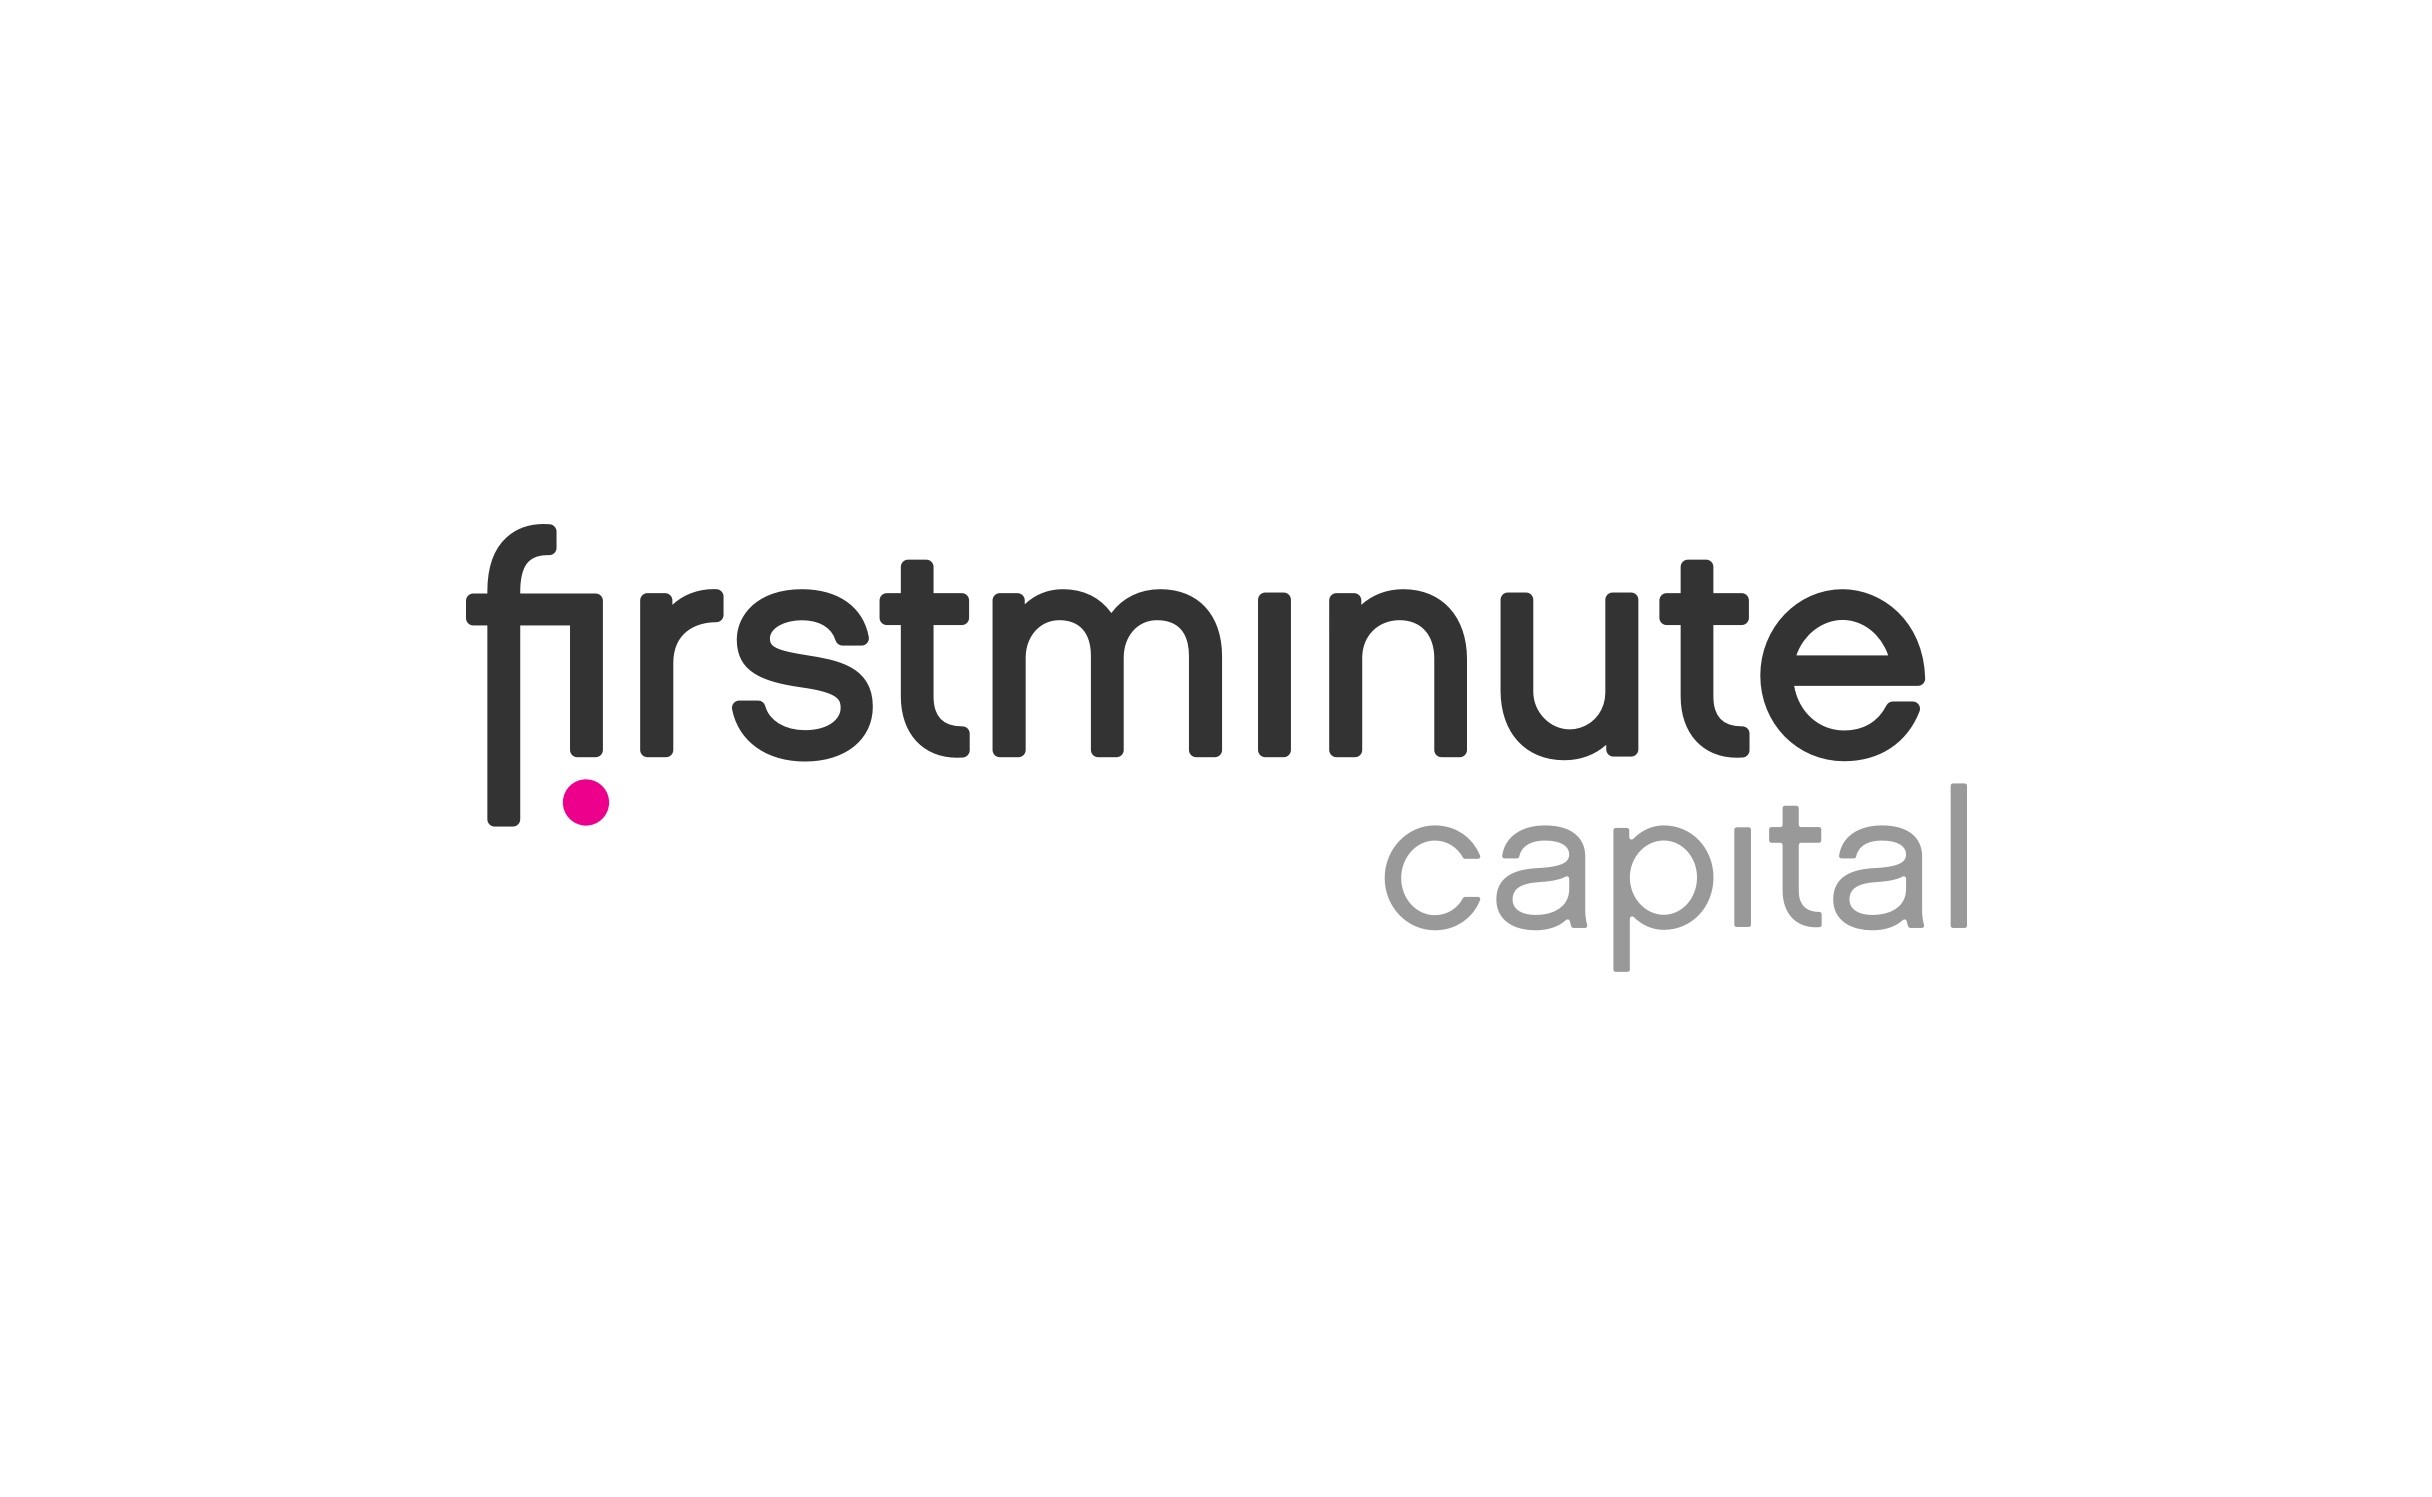 FIRST MINUTE CAPITAL